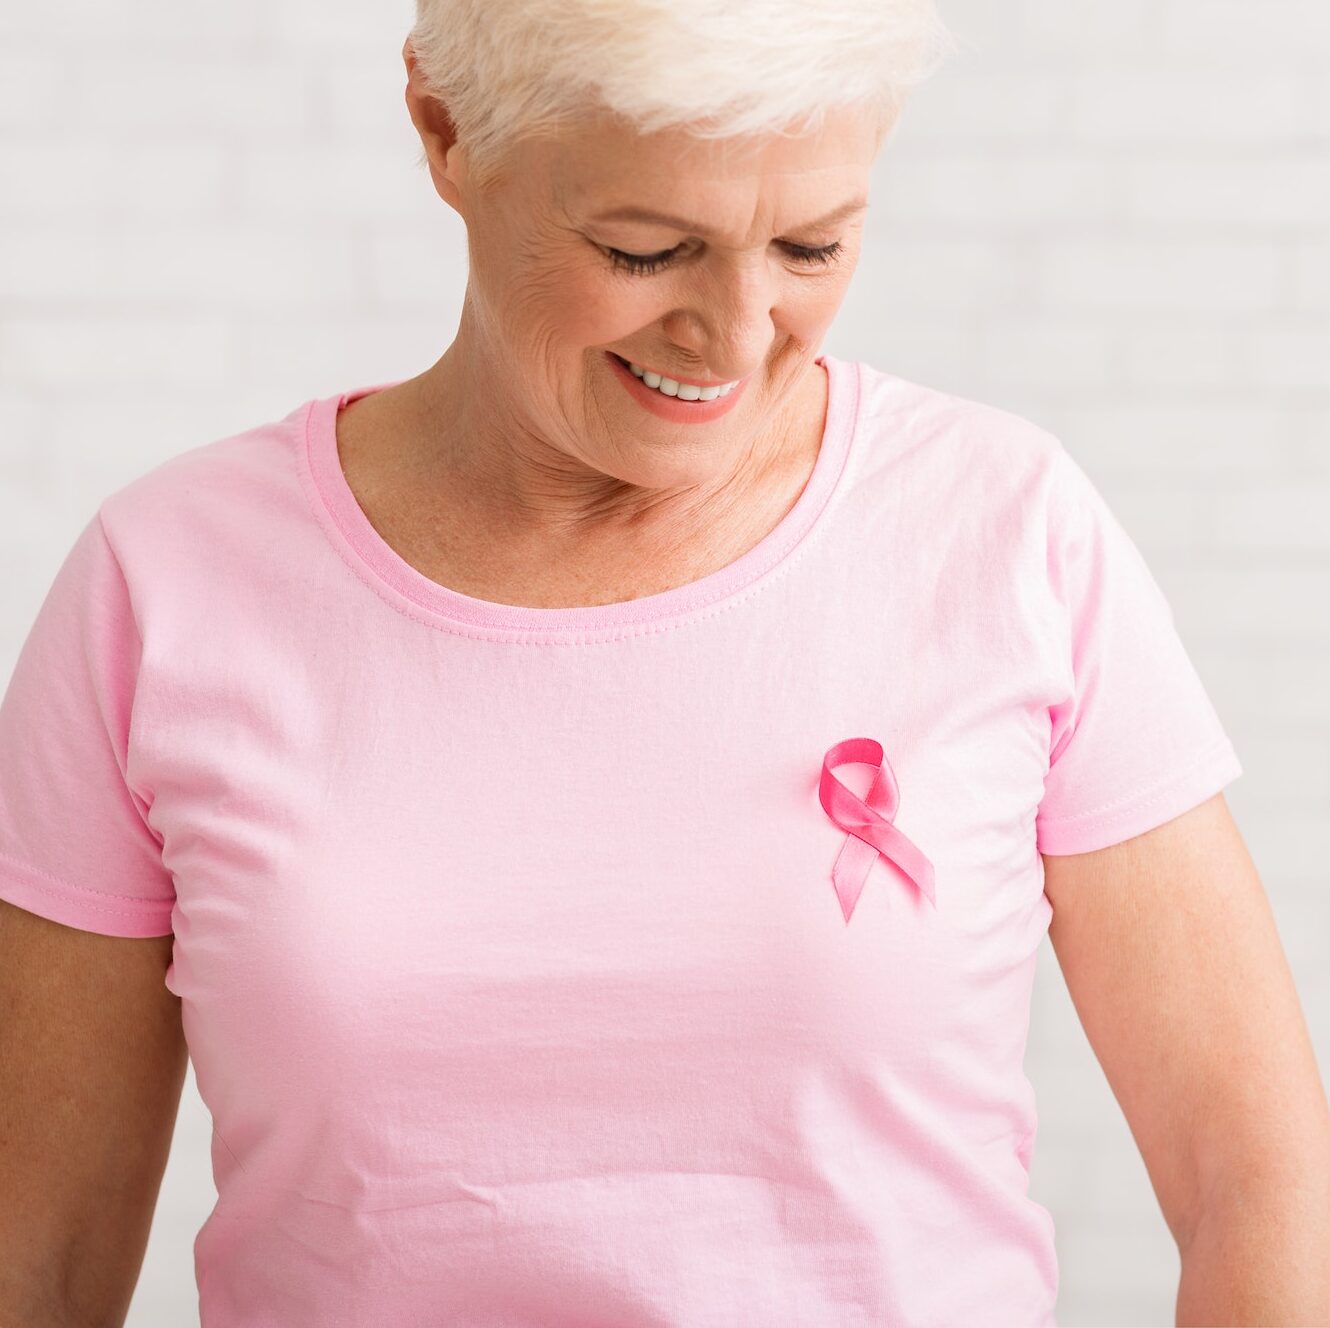 Elderly Woman Looking At Pink Cancer Ribbon On T-Shirt, Indoor